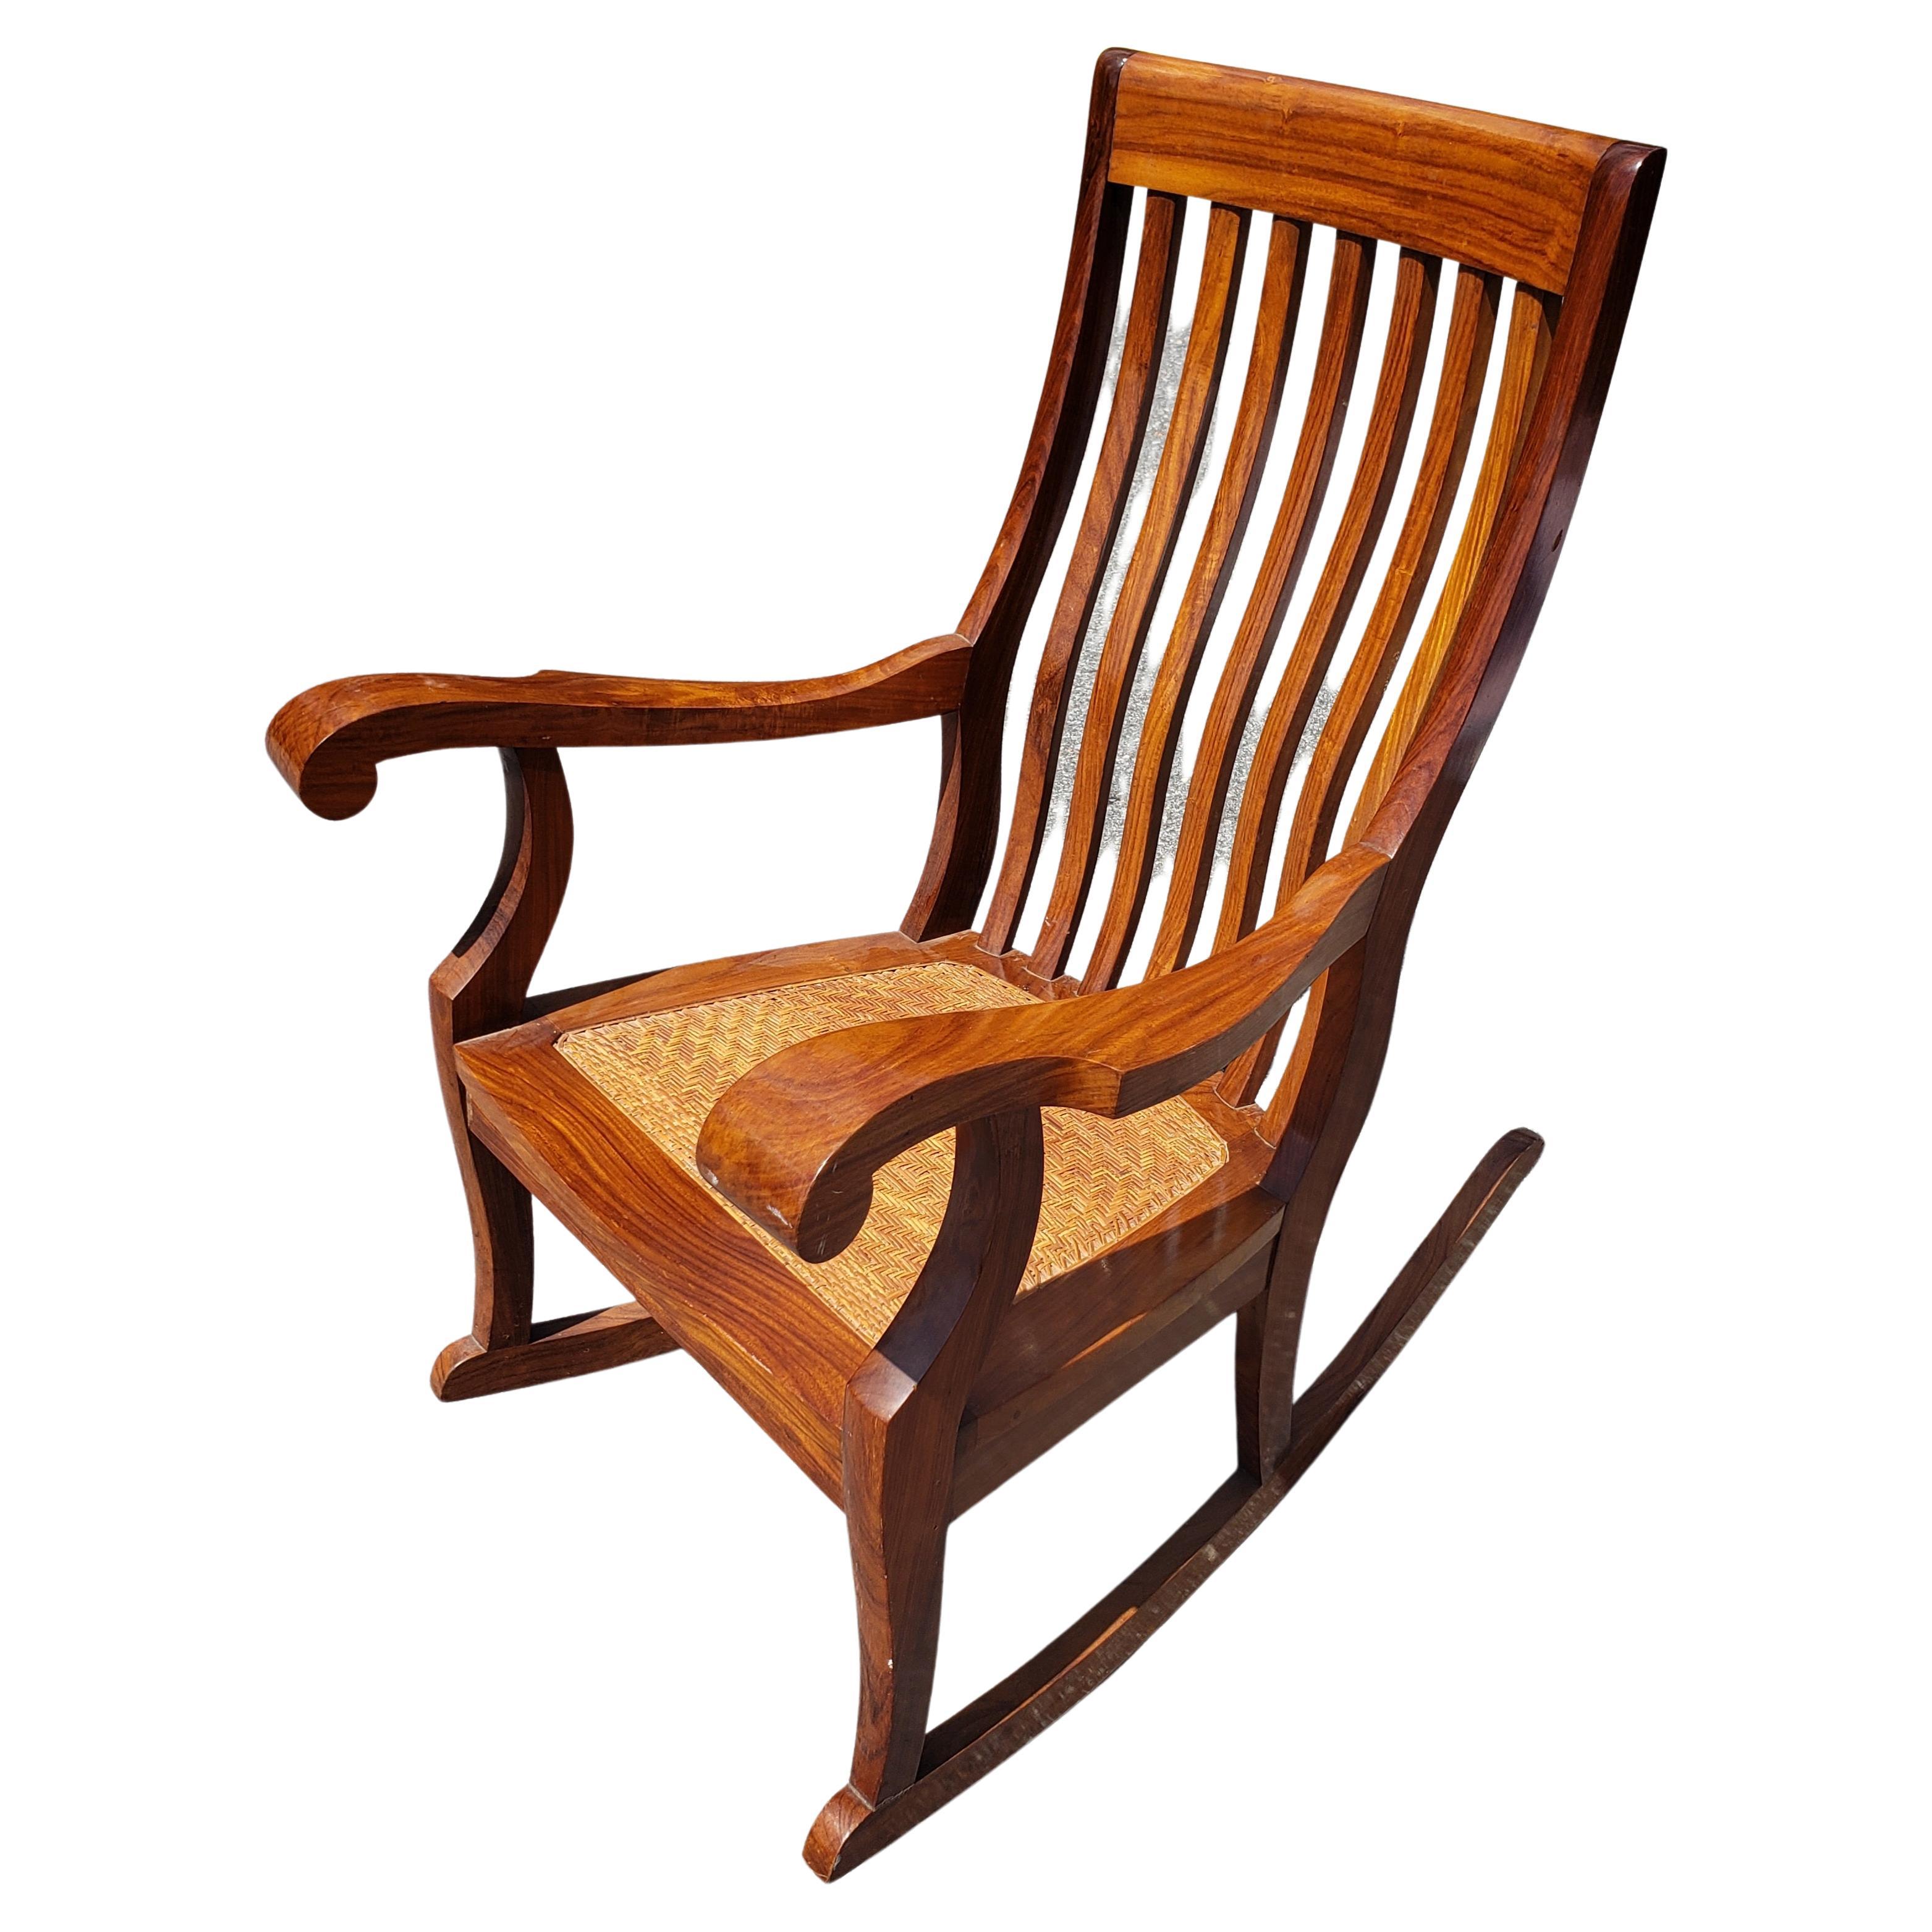 M. Hayat & Brothers Anglo-Indian Hardwood Woven Wicker Seat Rocking Chair For Sale